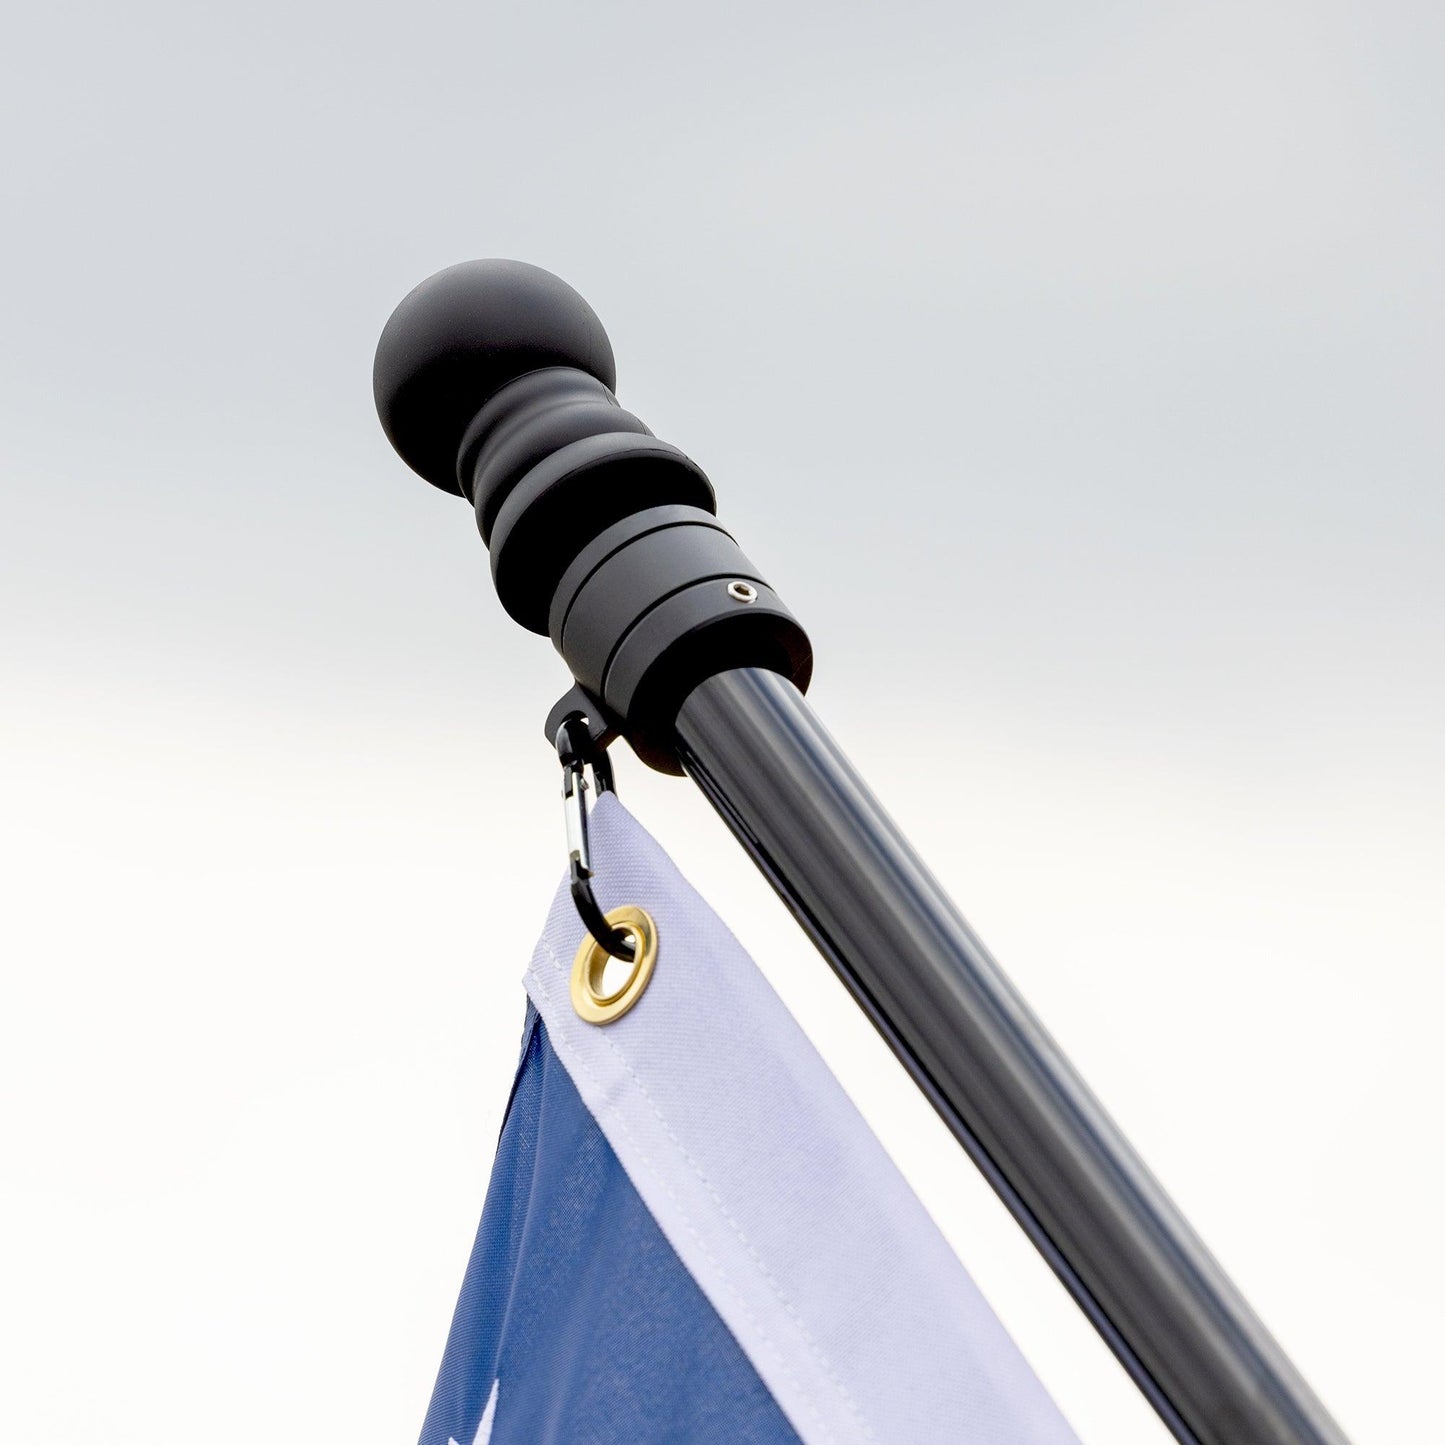 Close-up of a flagpole with a black finial and a partially visible flag attached by a ring. Equipped with tangle-free spinners, the 6 FT ALUMINUM FLAG POLE WITH TANGLE FREE SPINNERS by The FlagStars, flutters smoothly against the cloudy sky in the background.